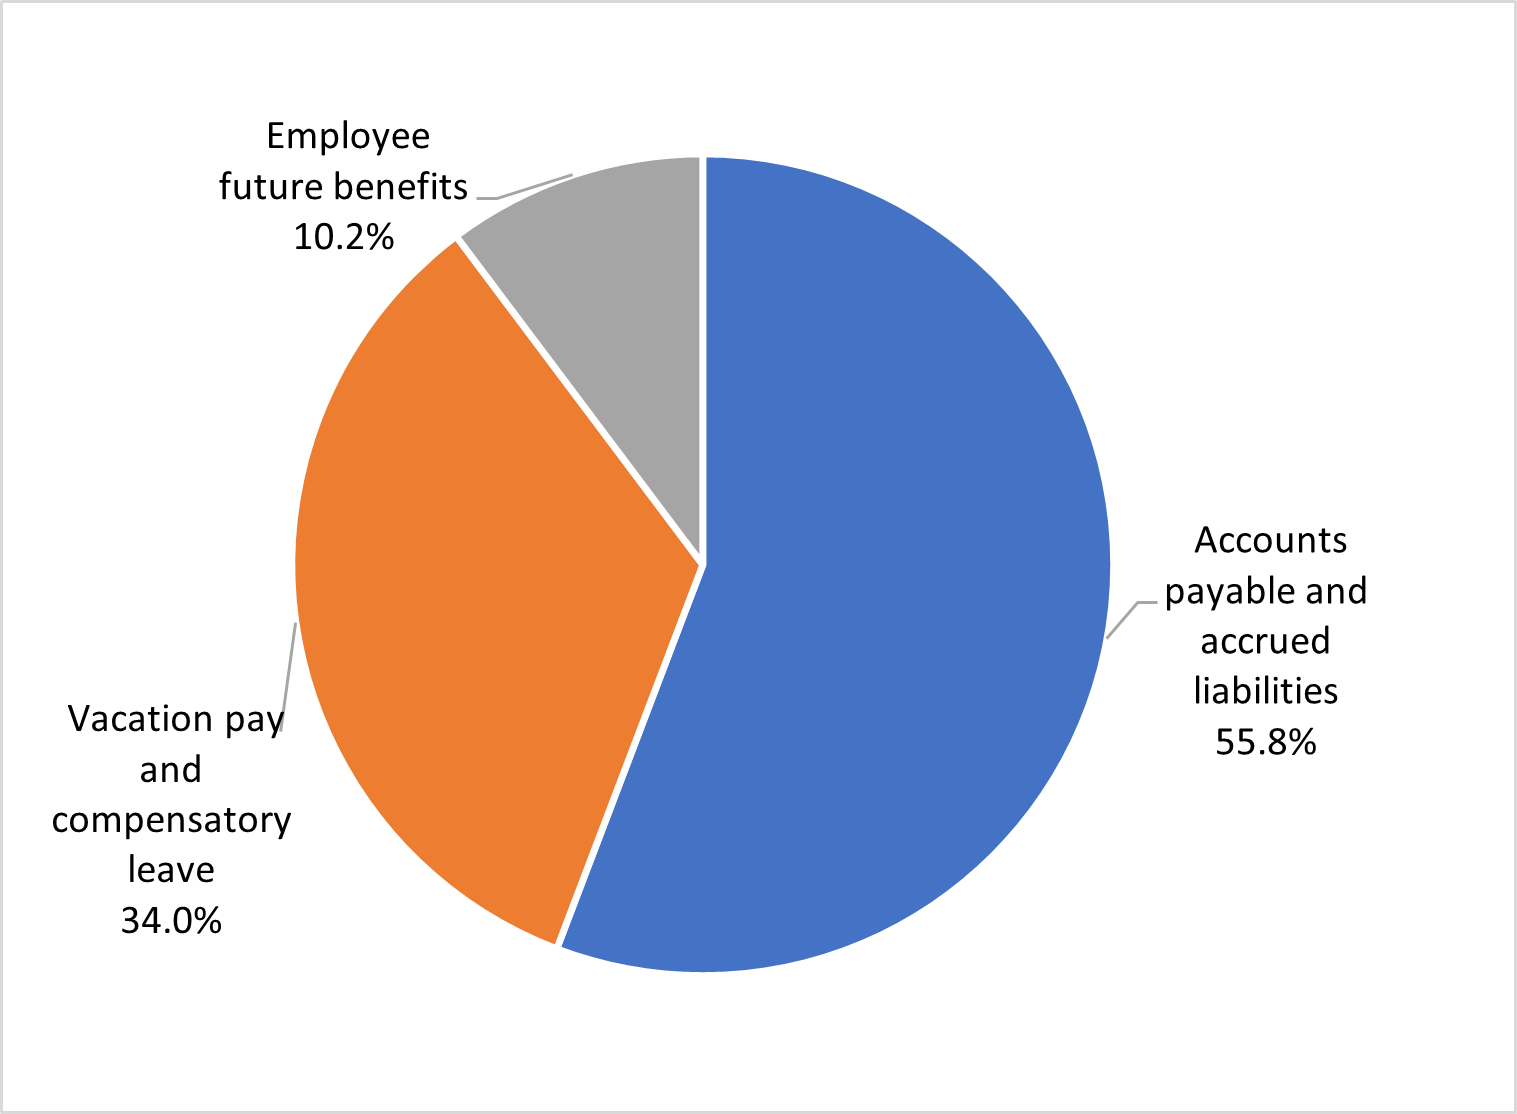 Liabilities by type, described in following paragraph